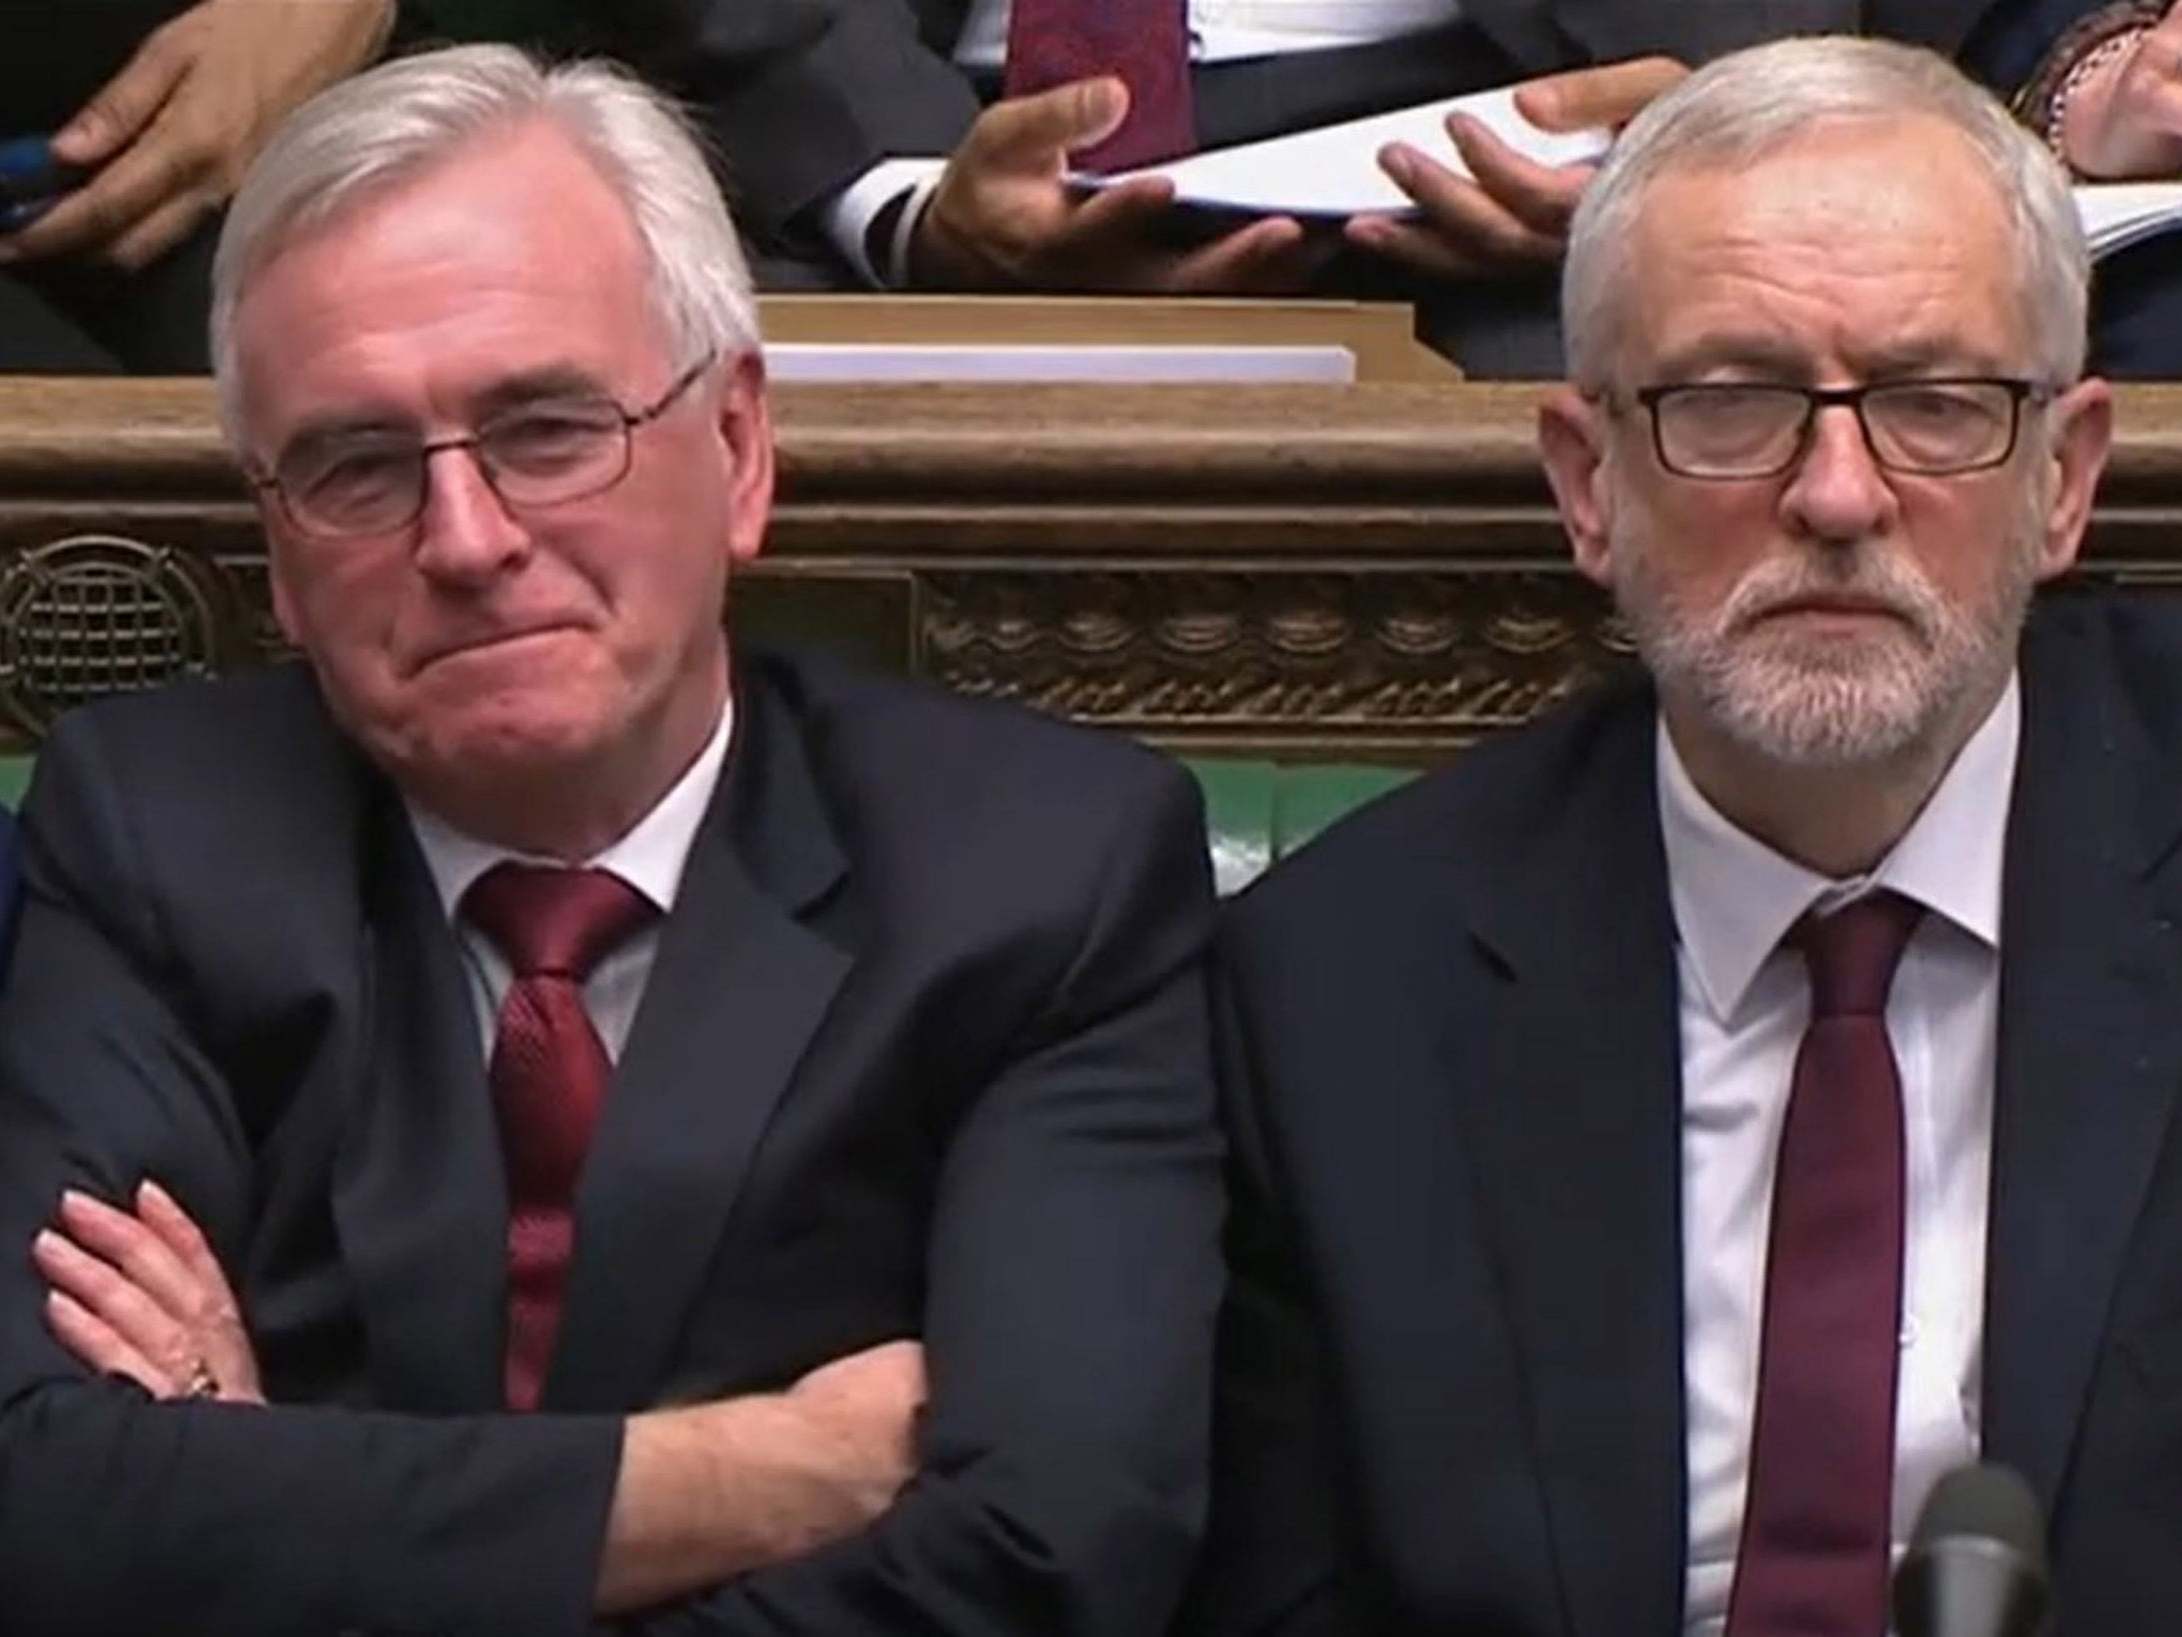 McDonnell and Corbyn listen to Sunak delivering his Budget